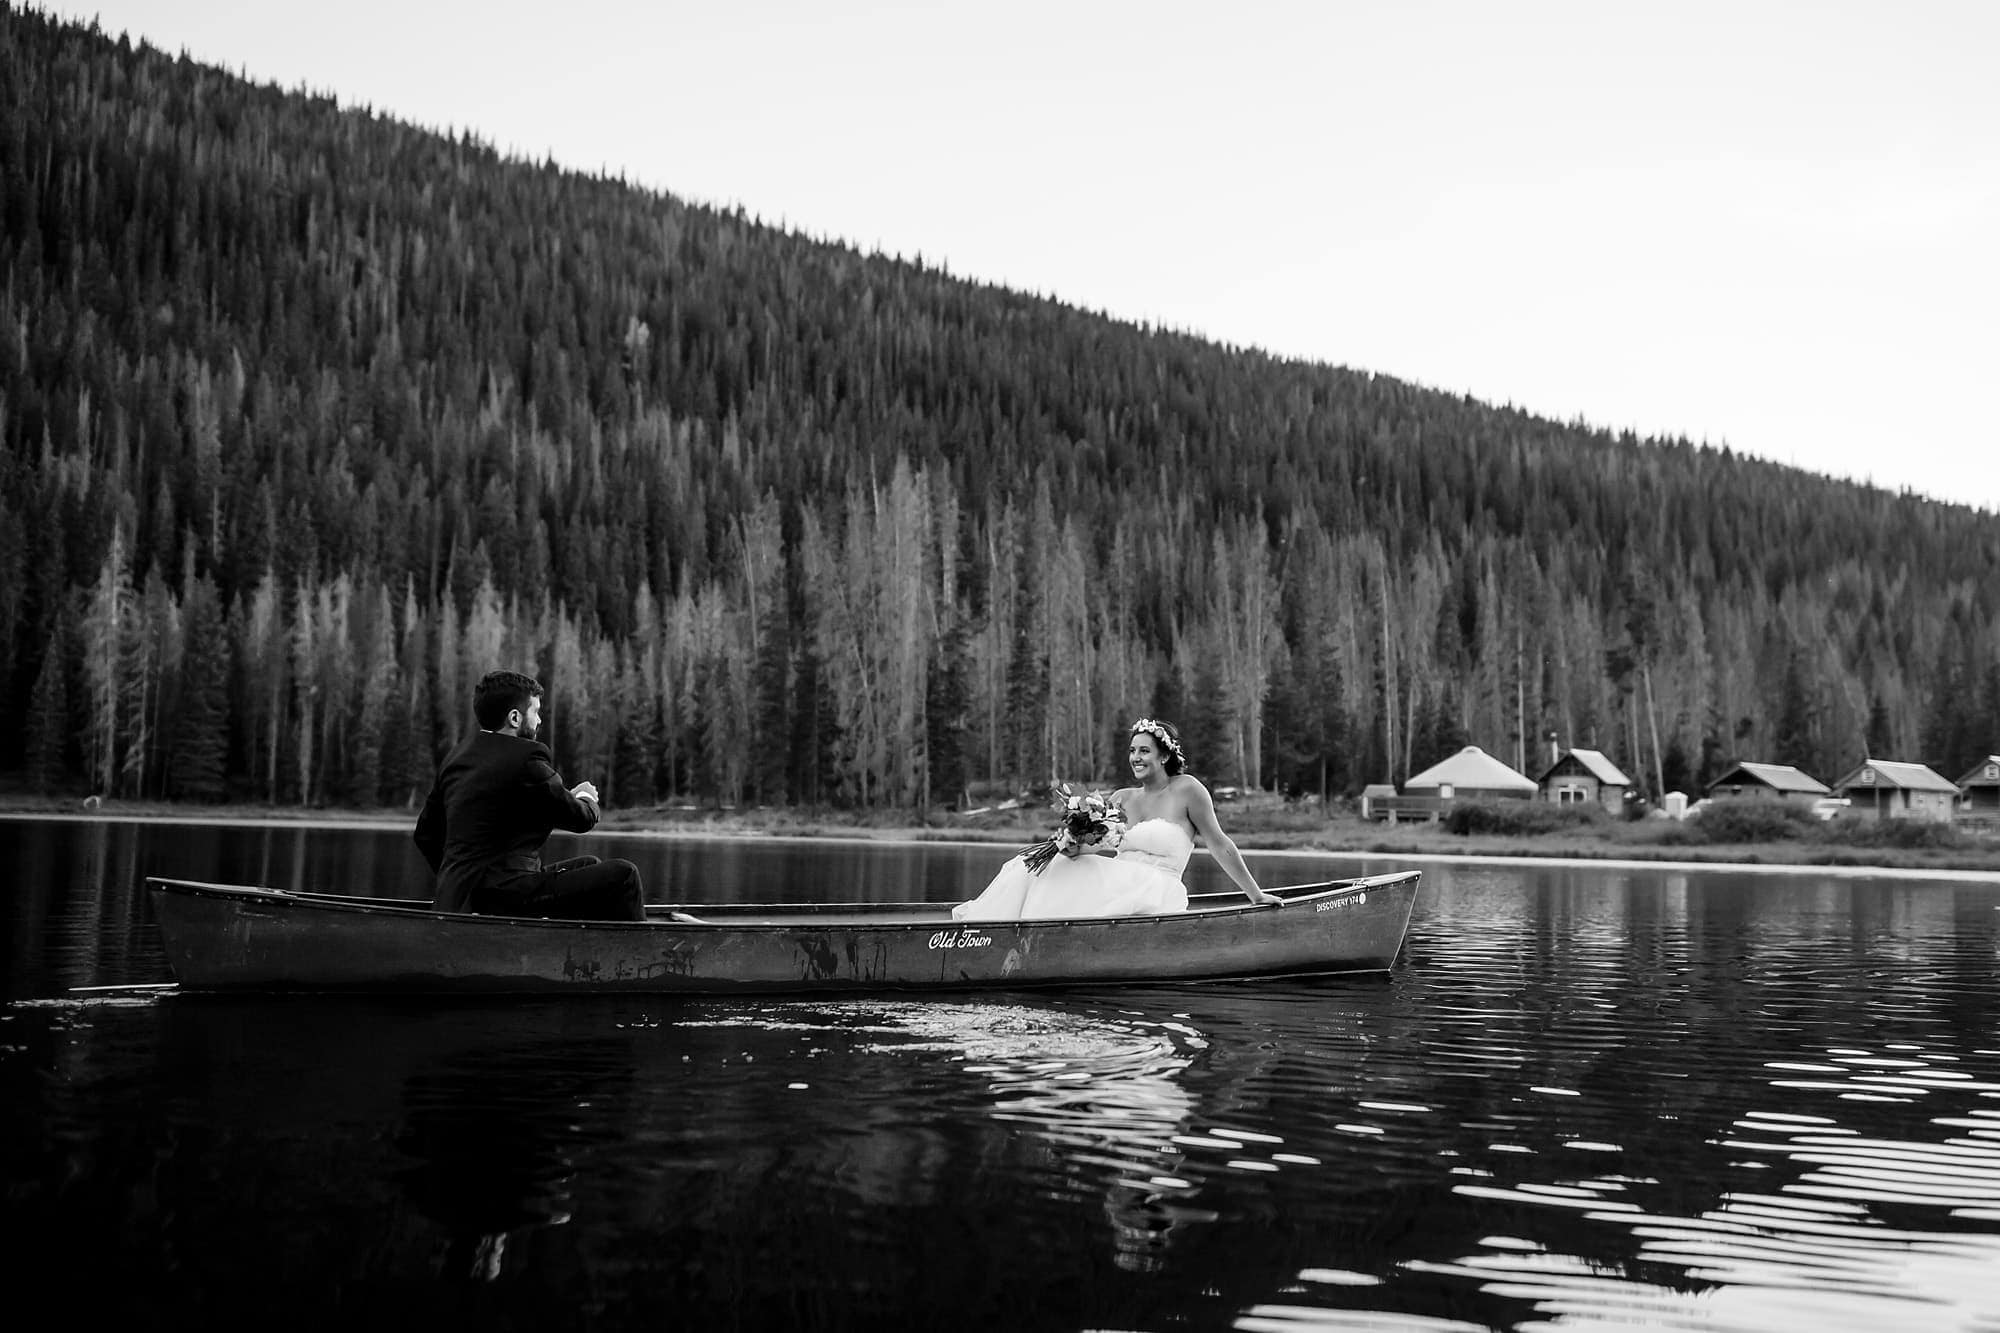 Becky and Brian row in a canoe on Piney Lake during their wedding in September outside of Vail, Colorado.